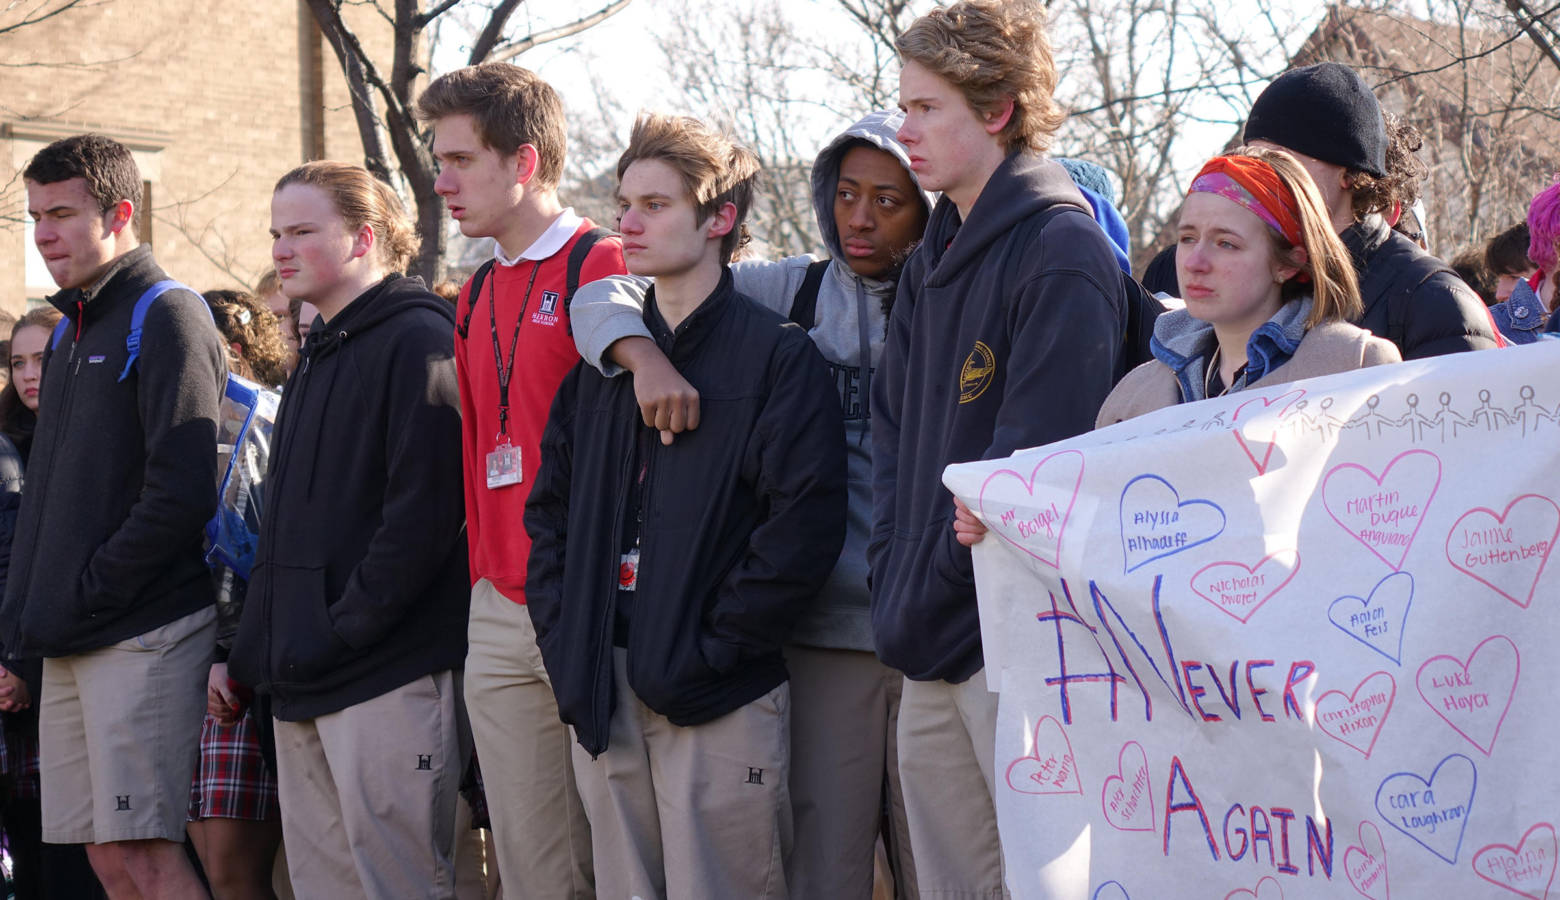 Students at Herron High School in downtown Indianapolis walked out of class Wednesday, March 14, 2018 to call for an increase in school safety and honor the victims of the Parkland, Florida shooting. (Eric Weddle/WFYI News)